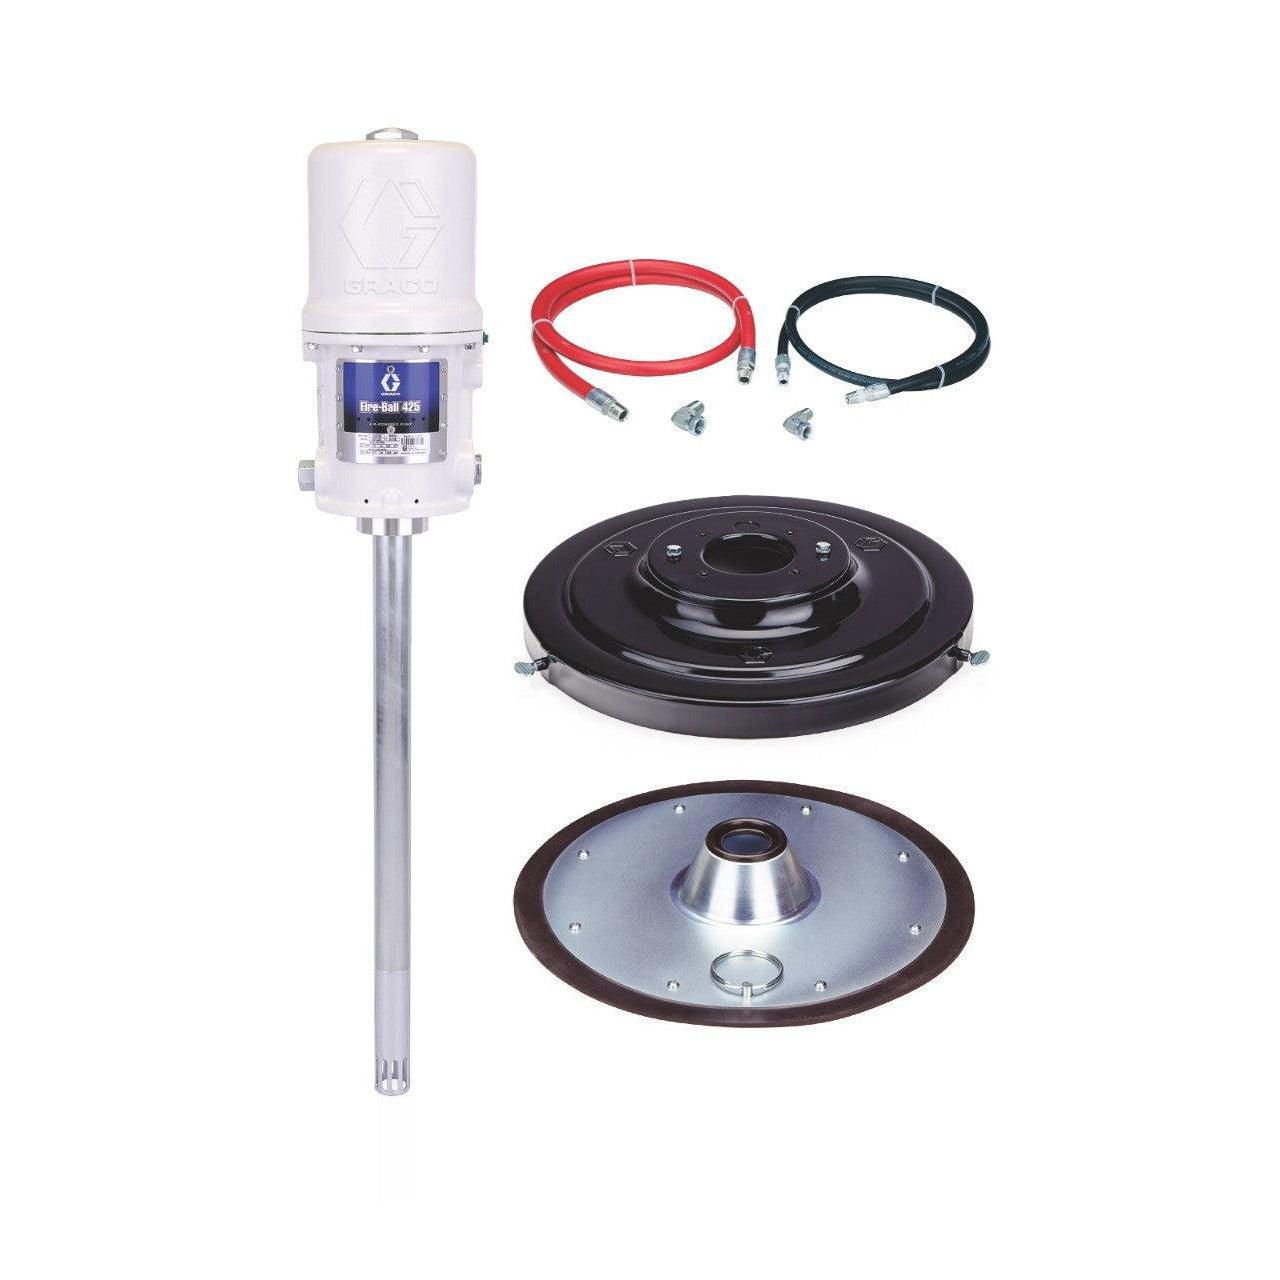 Fire-Ball¬Æ 425 Series 75:1 120 lb. (54 kg) 1/2 in. x 6 ft. Grease Pump Stationary Cover-Mount Package